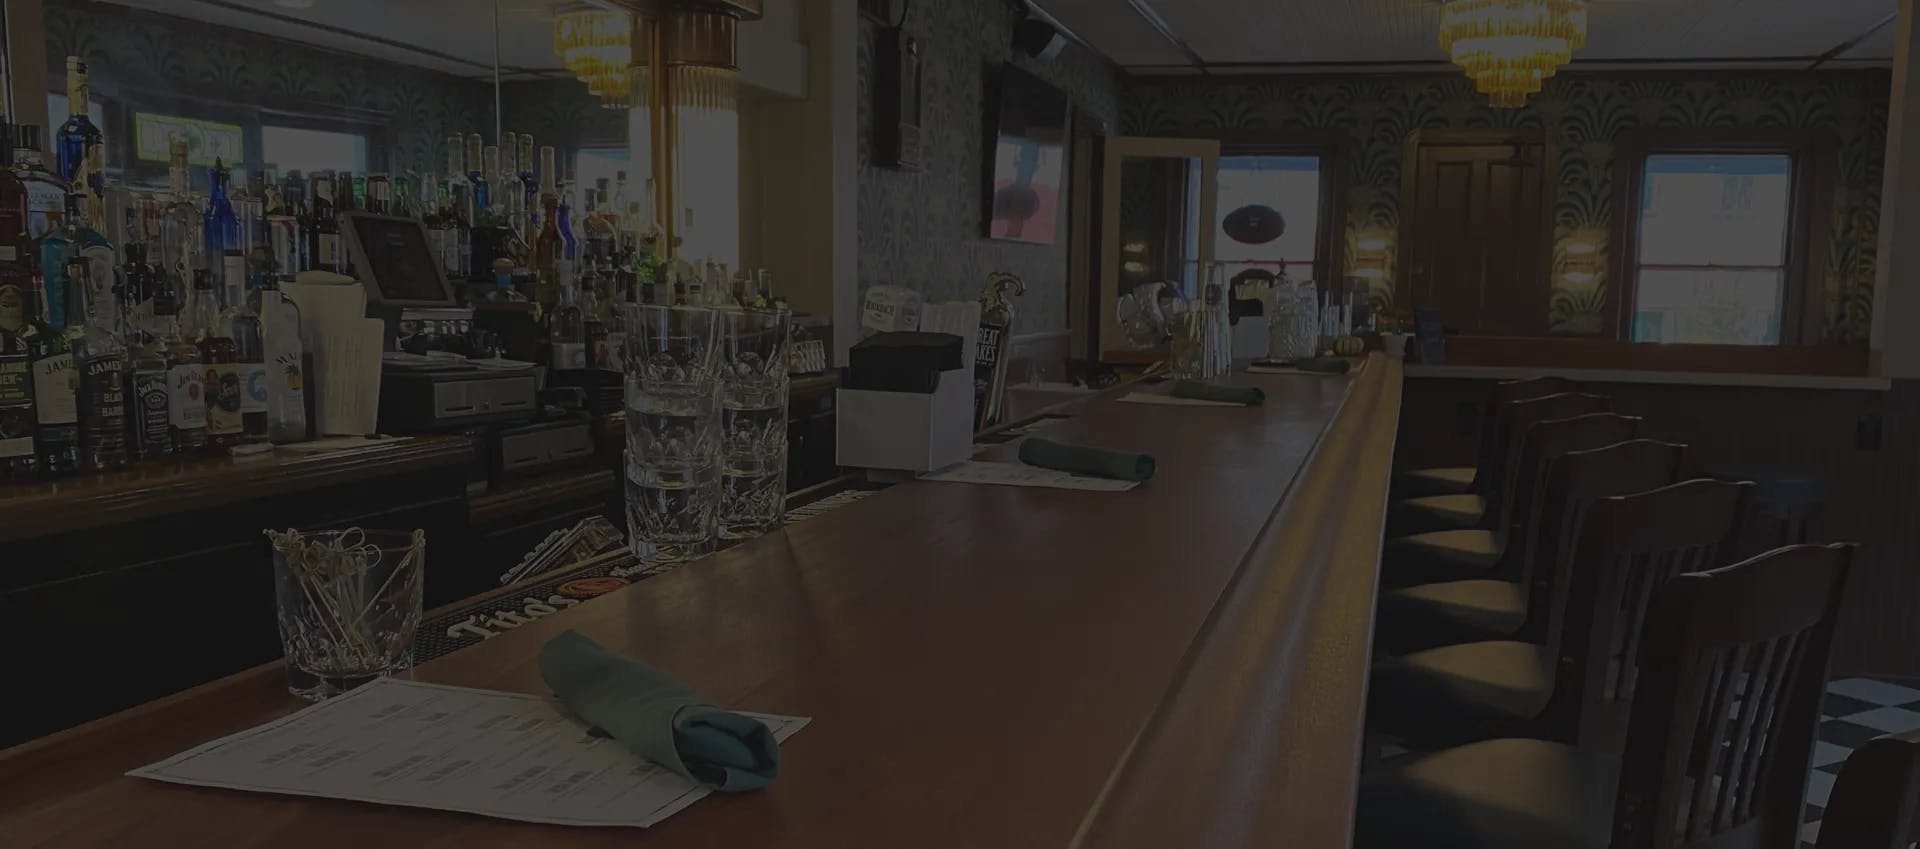 Background photo of The Social Restaurant bar area